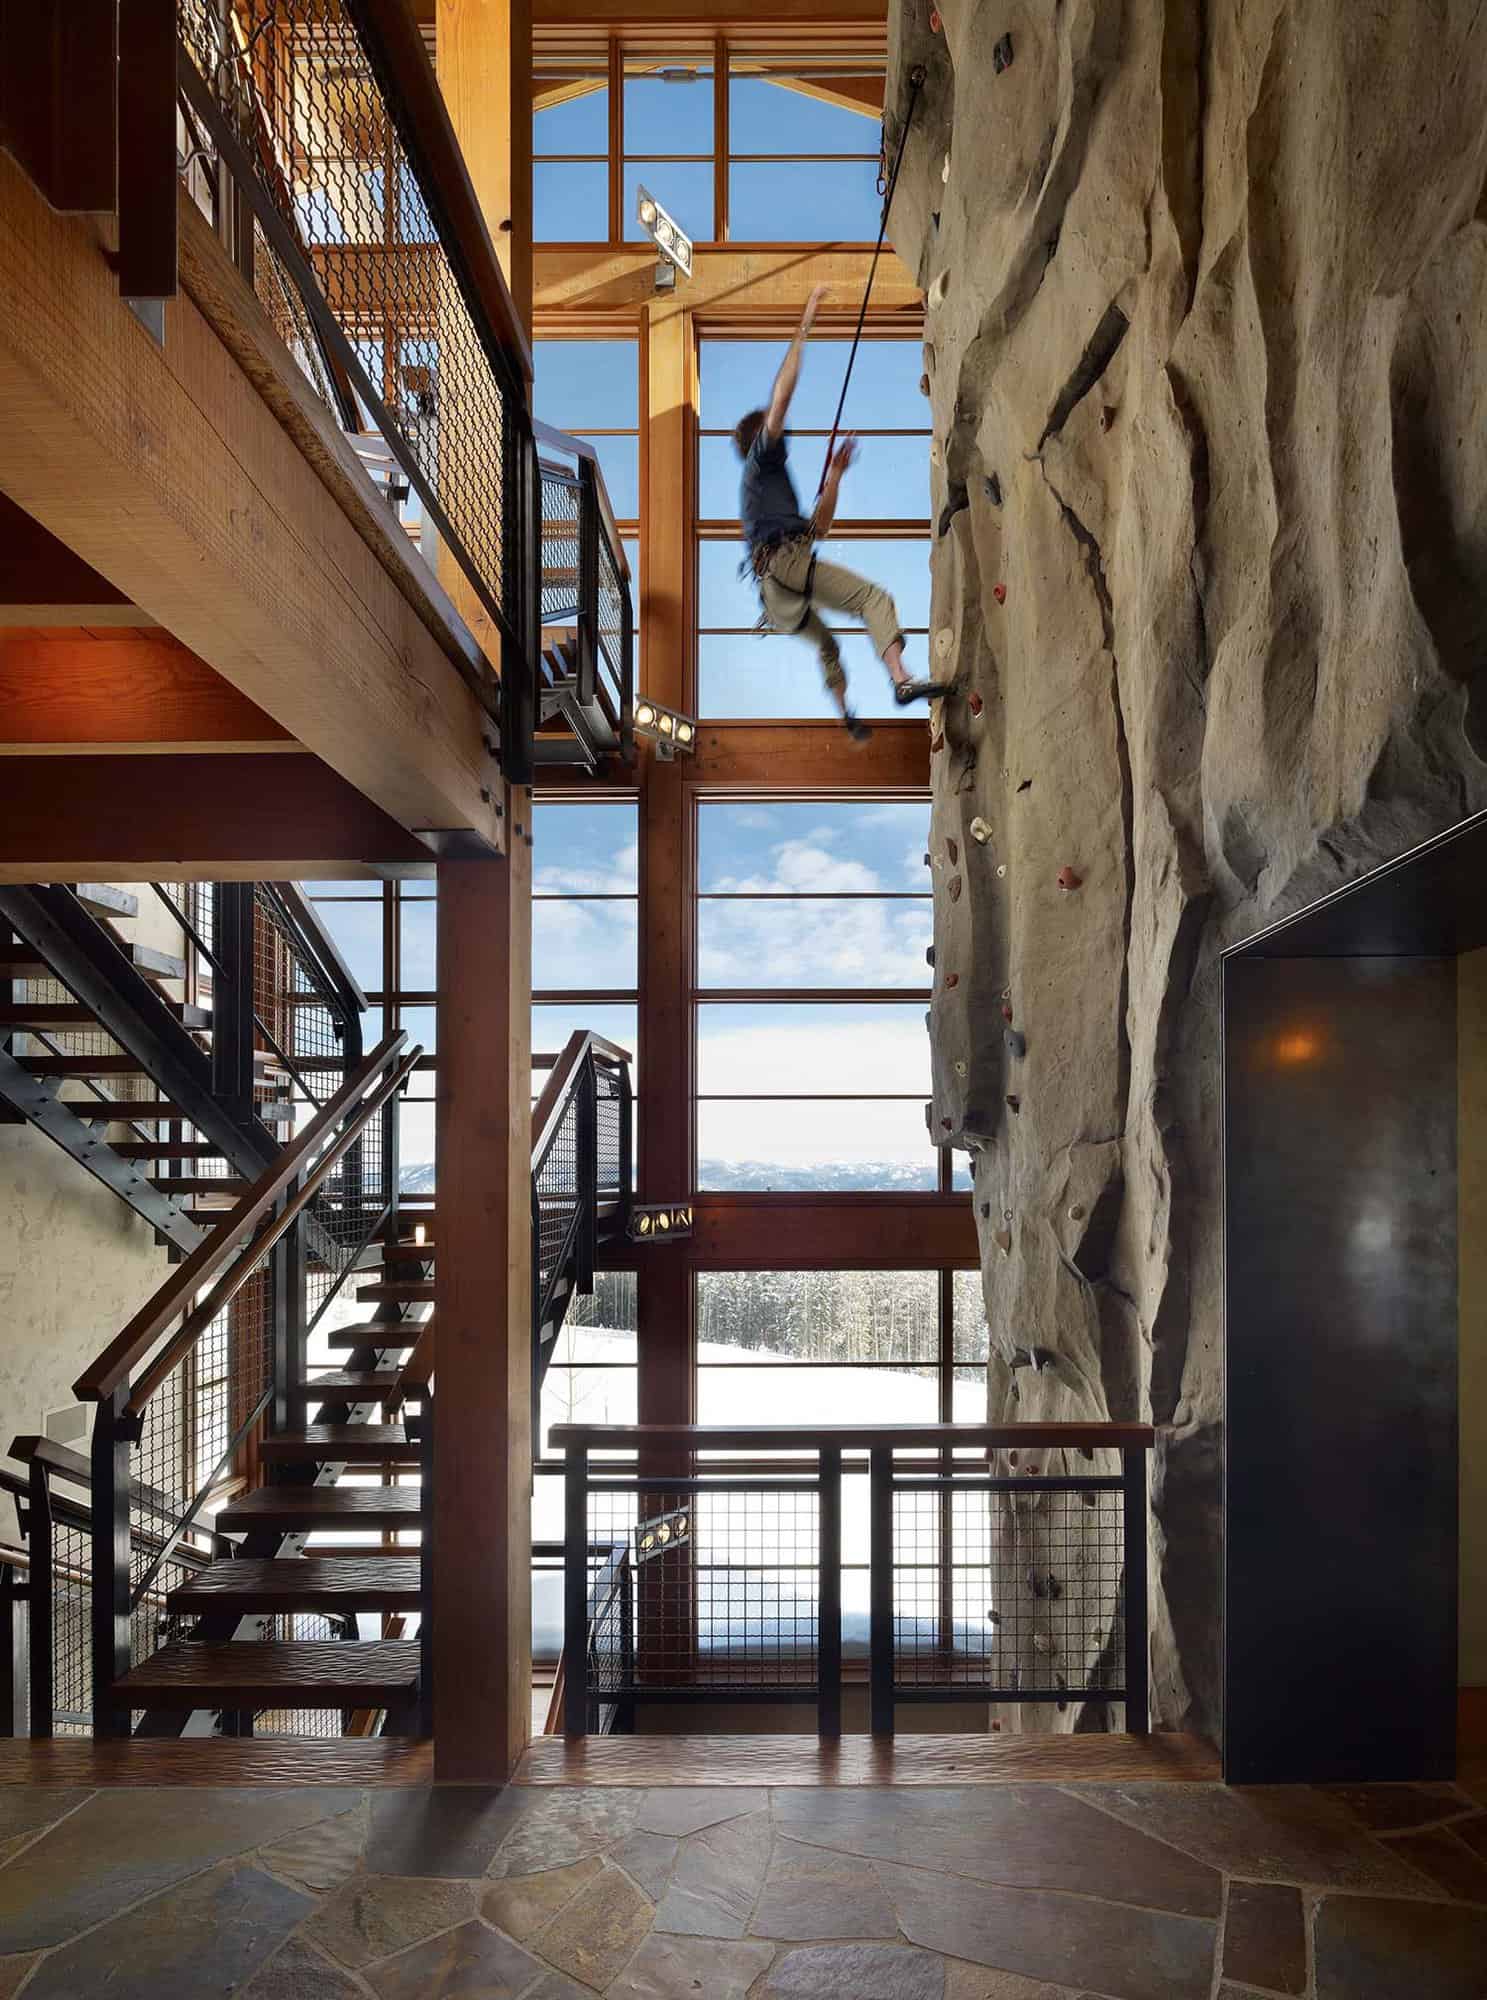 modern rustic staircase and rock climbing wall